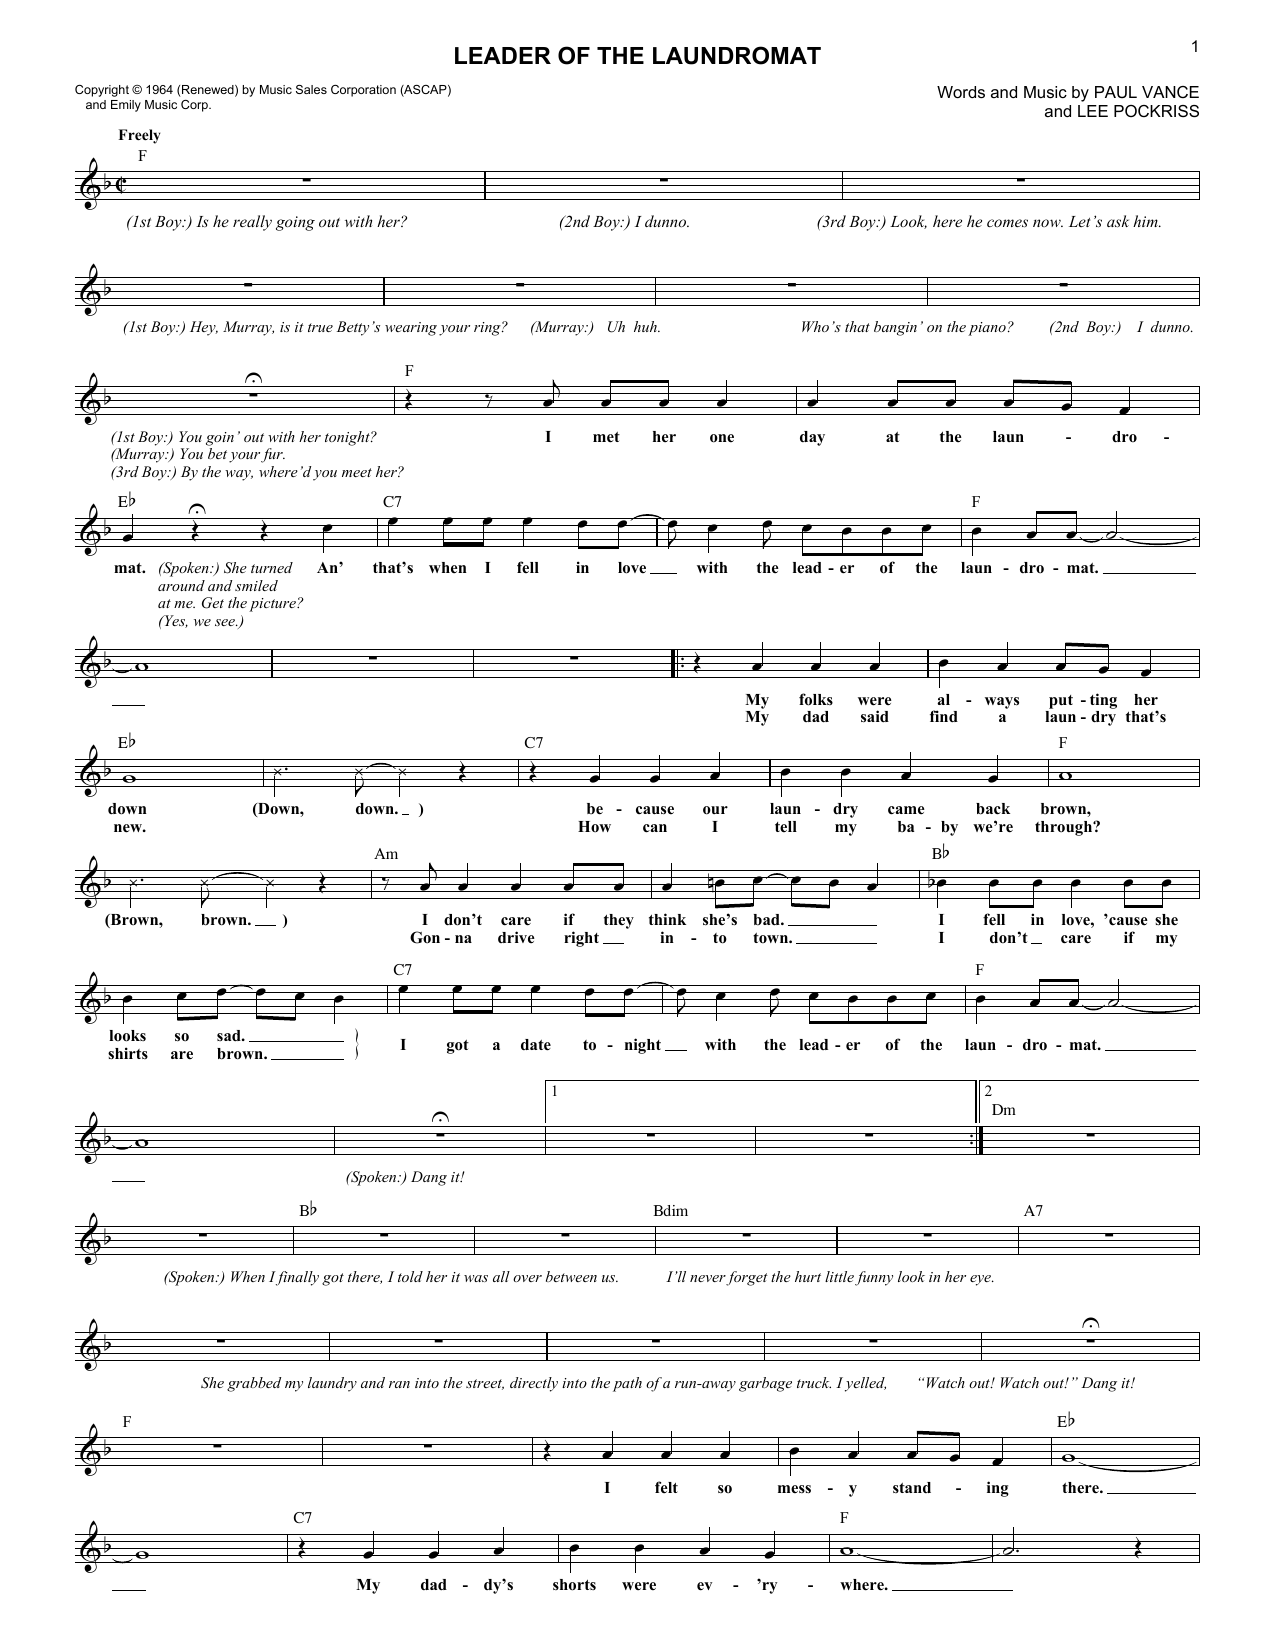 Download The Detergents Leader Of The Laundromat Sheet Music